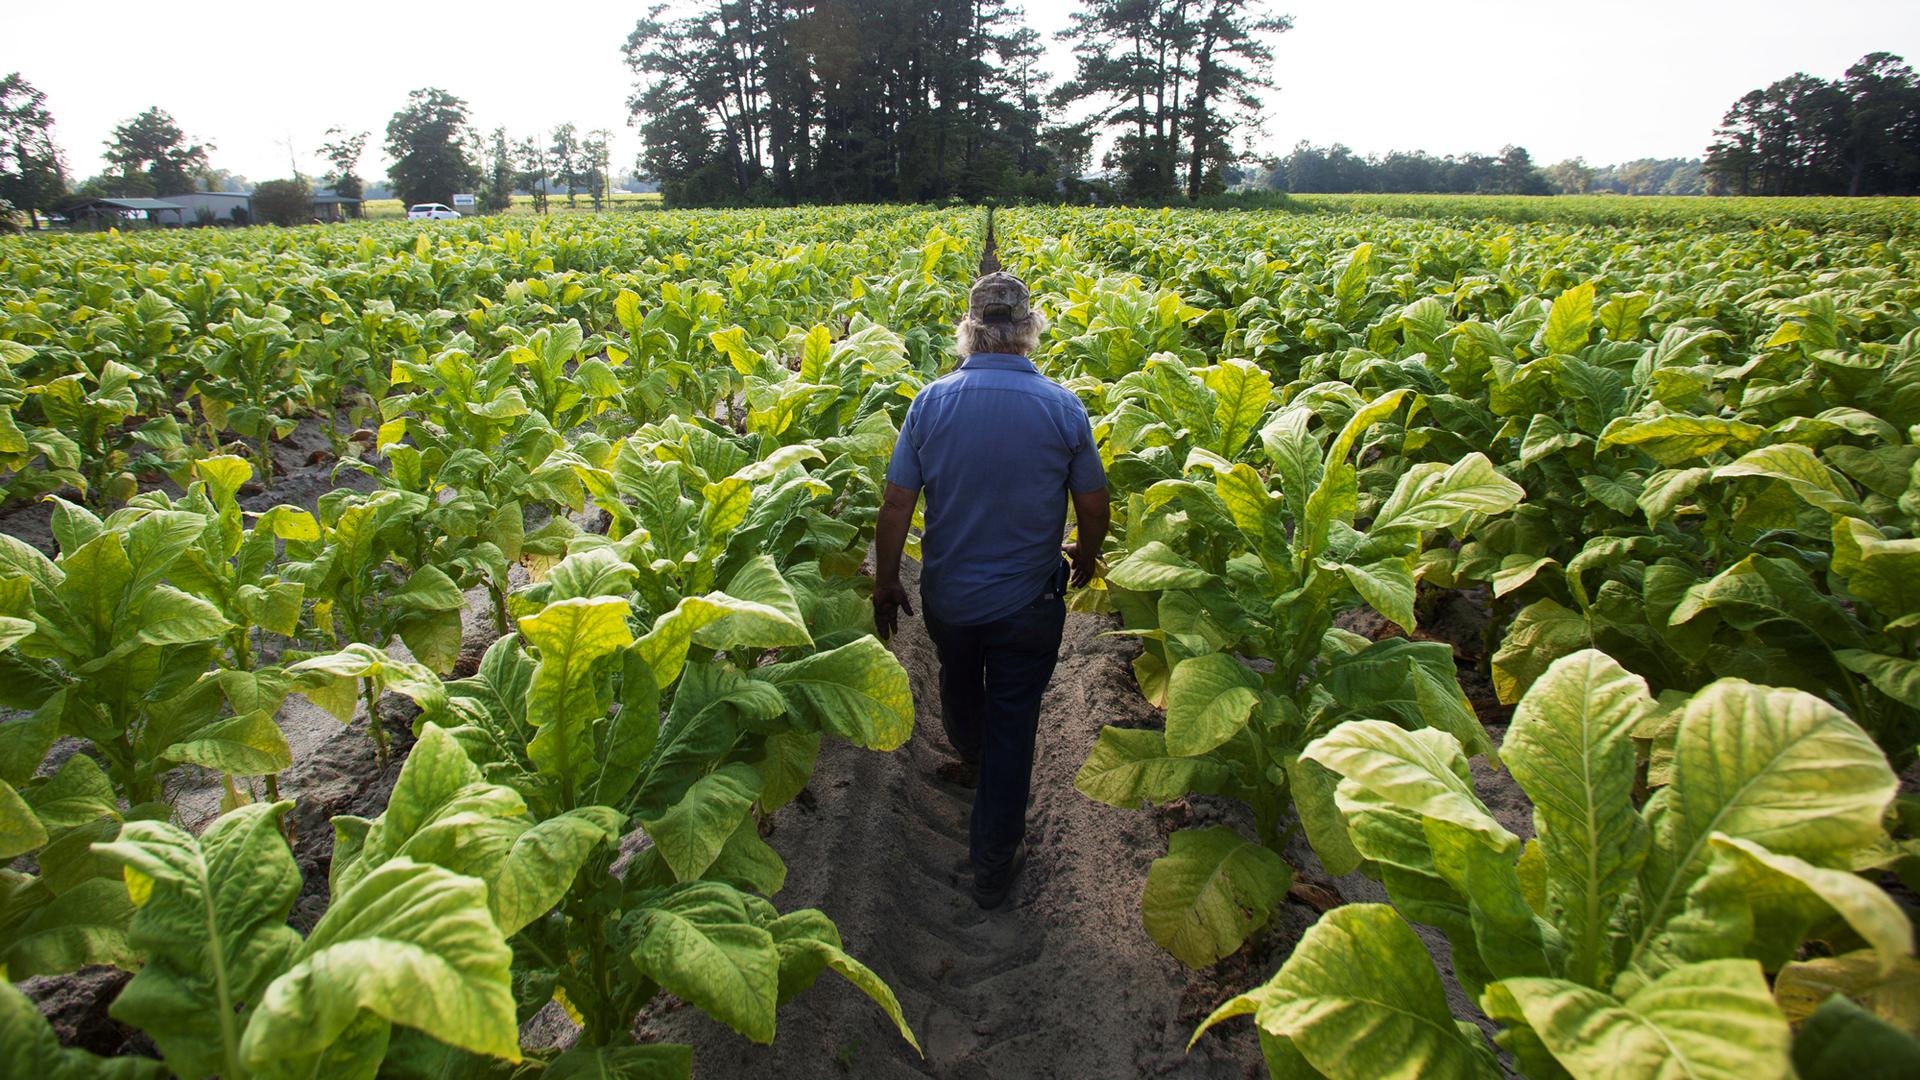 A farmer walks away from the camera through a field of rich green tobacco plants.